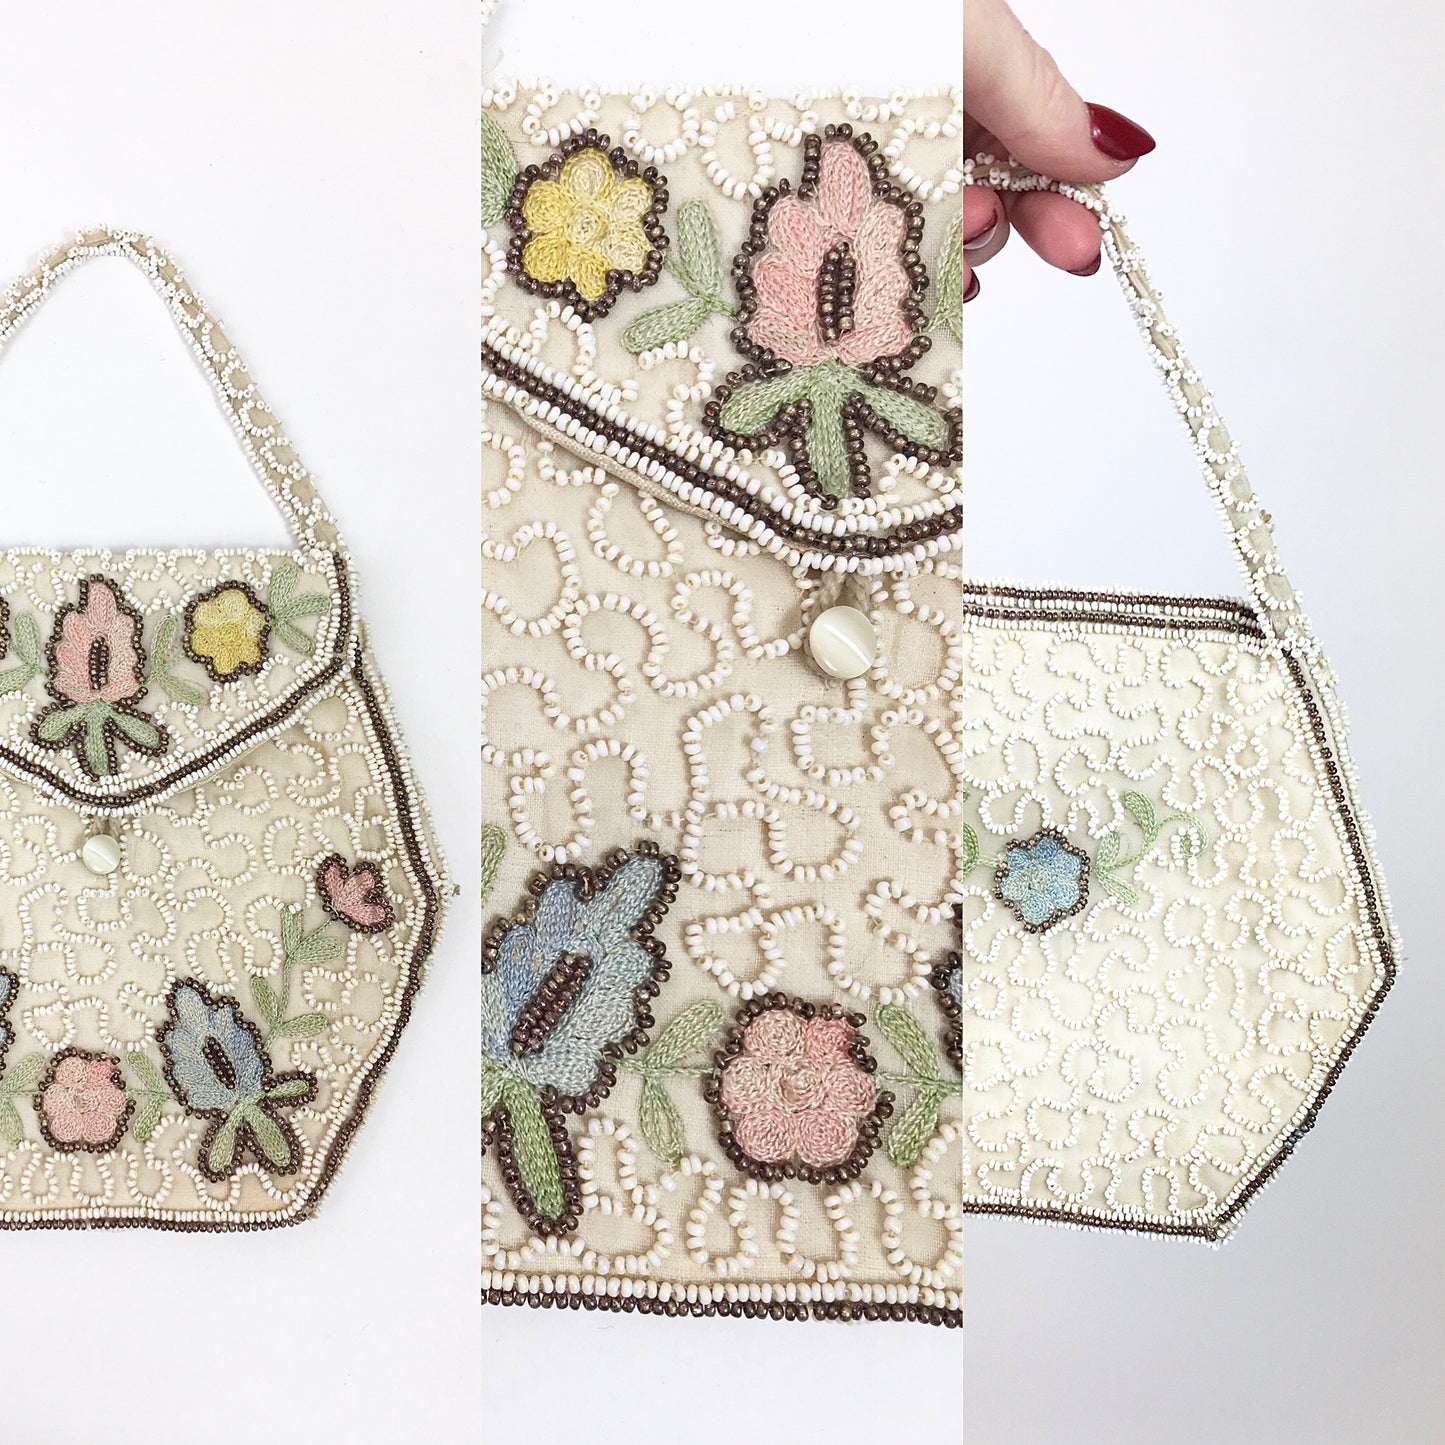 Original 1920's / 1930's Beaded Evening Bag - With Hues of Blush Pinks, Yellows, Blues and Greens